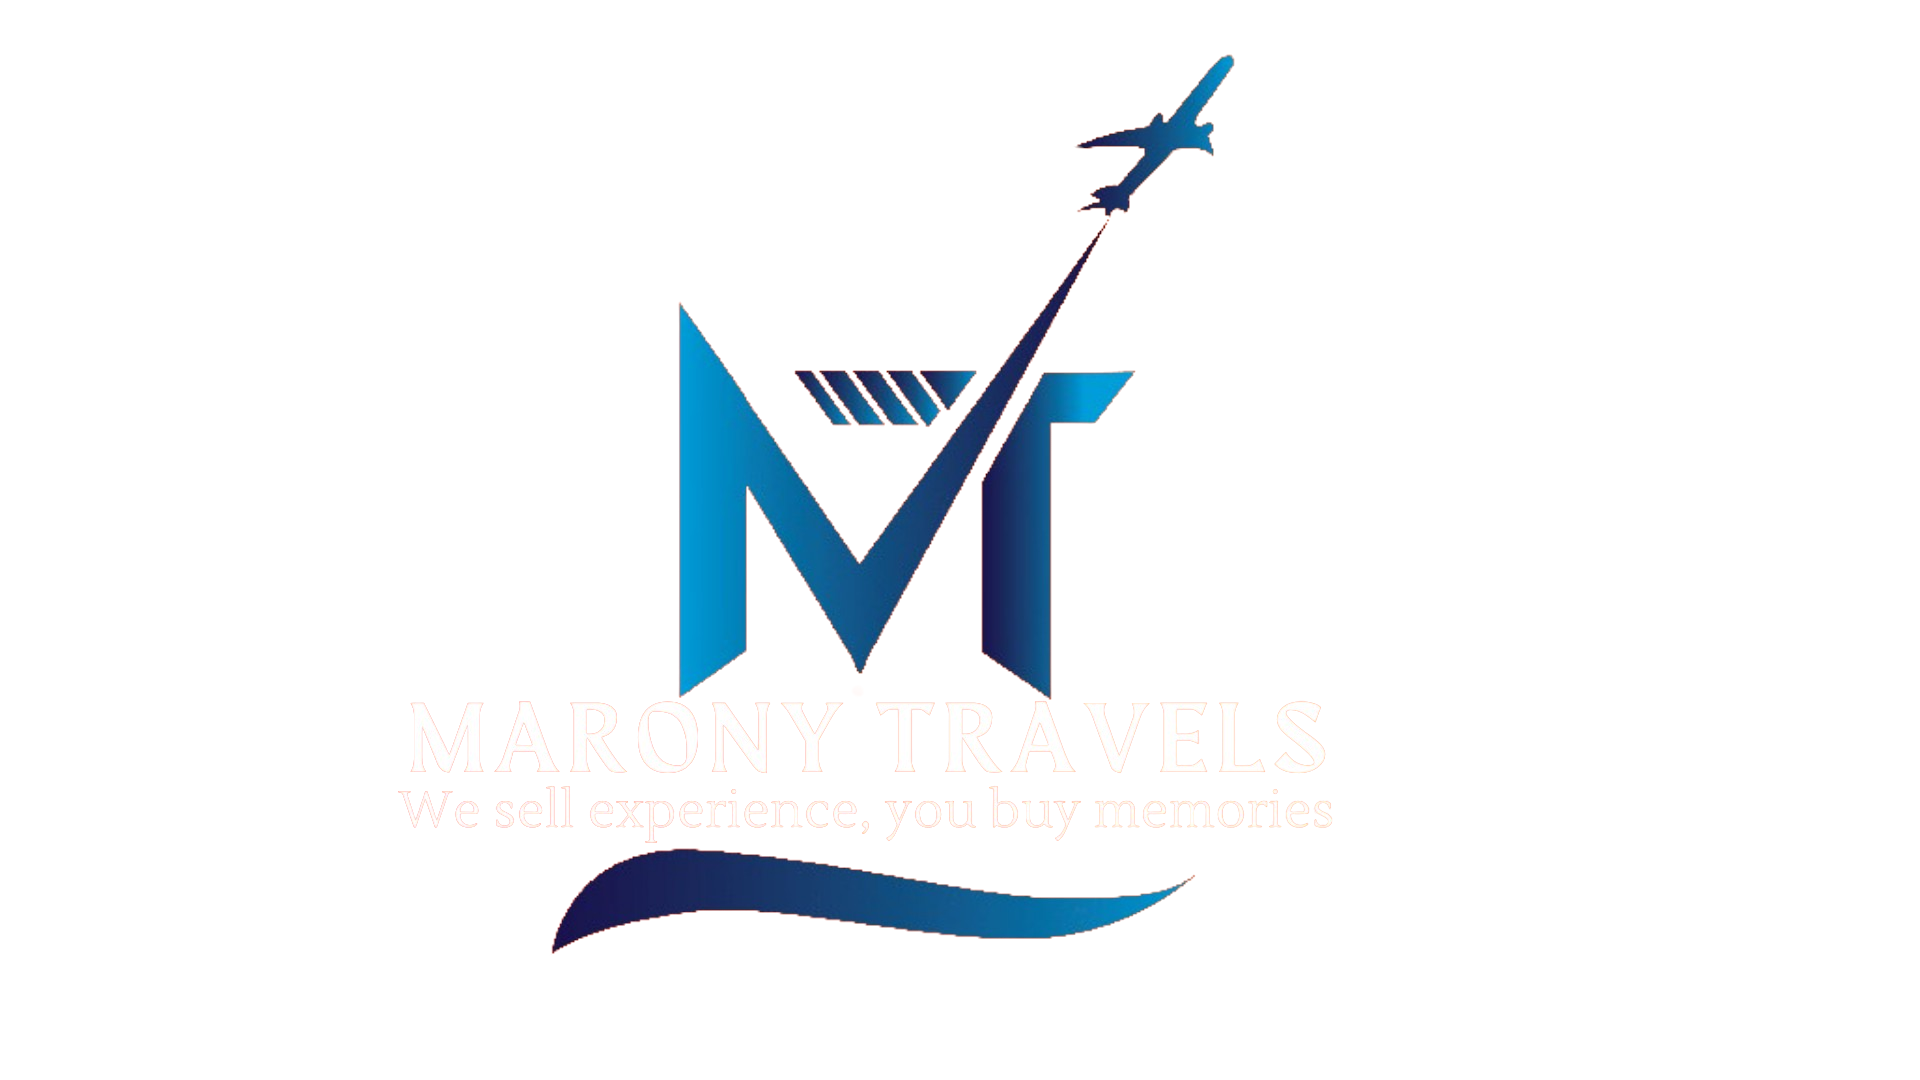 Travel with the experts